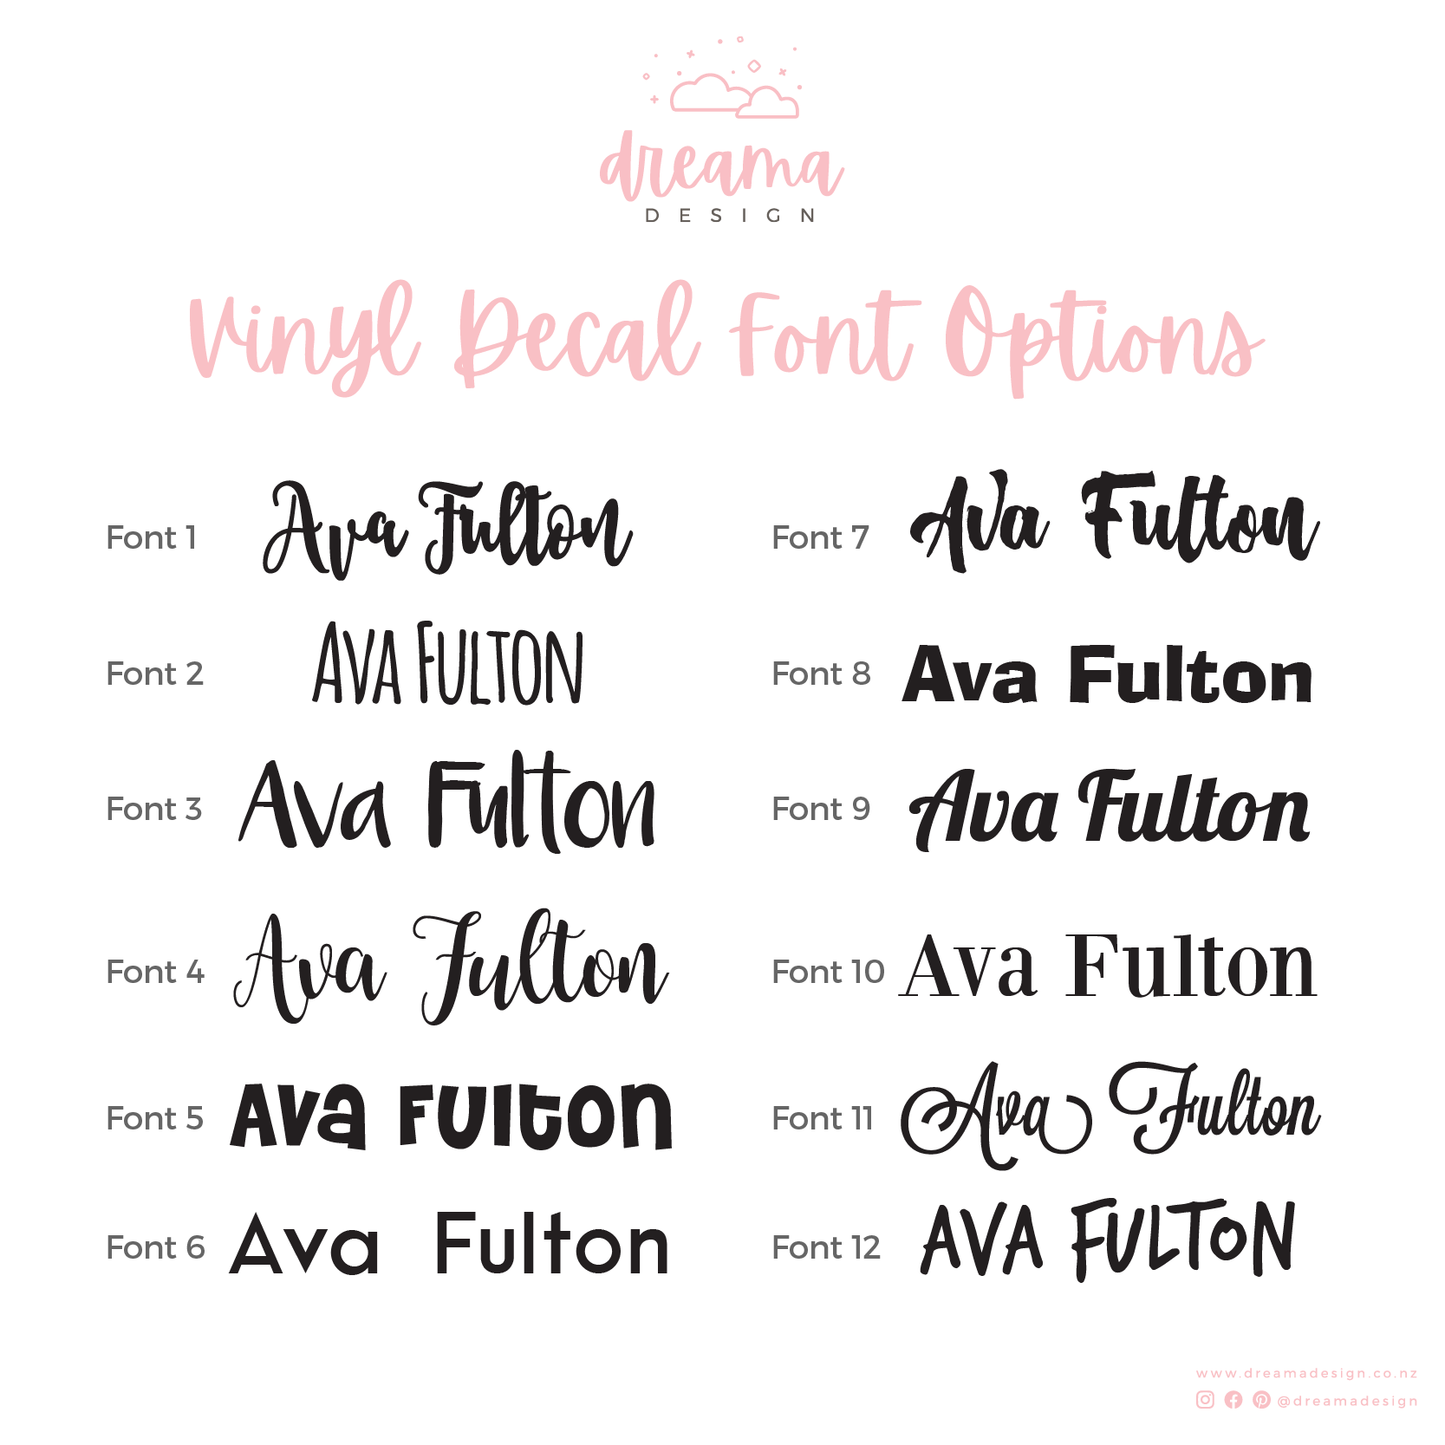 Lunchbox Decal Name Sheets